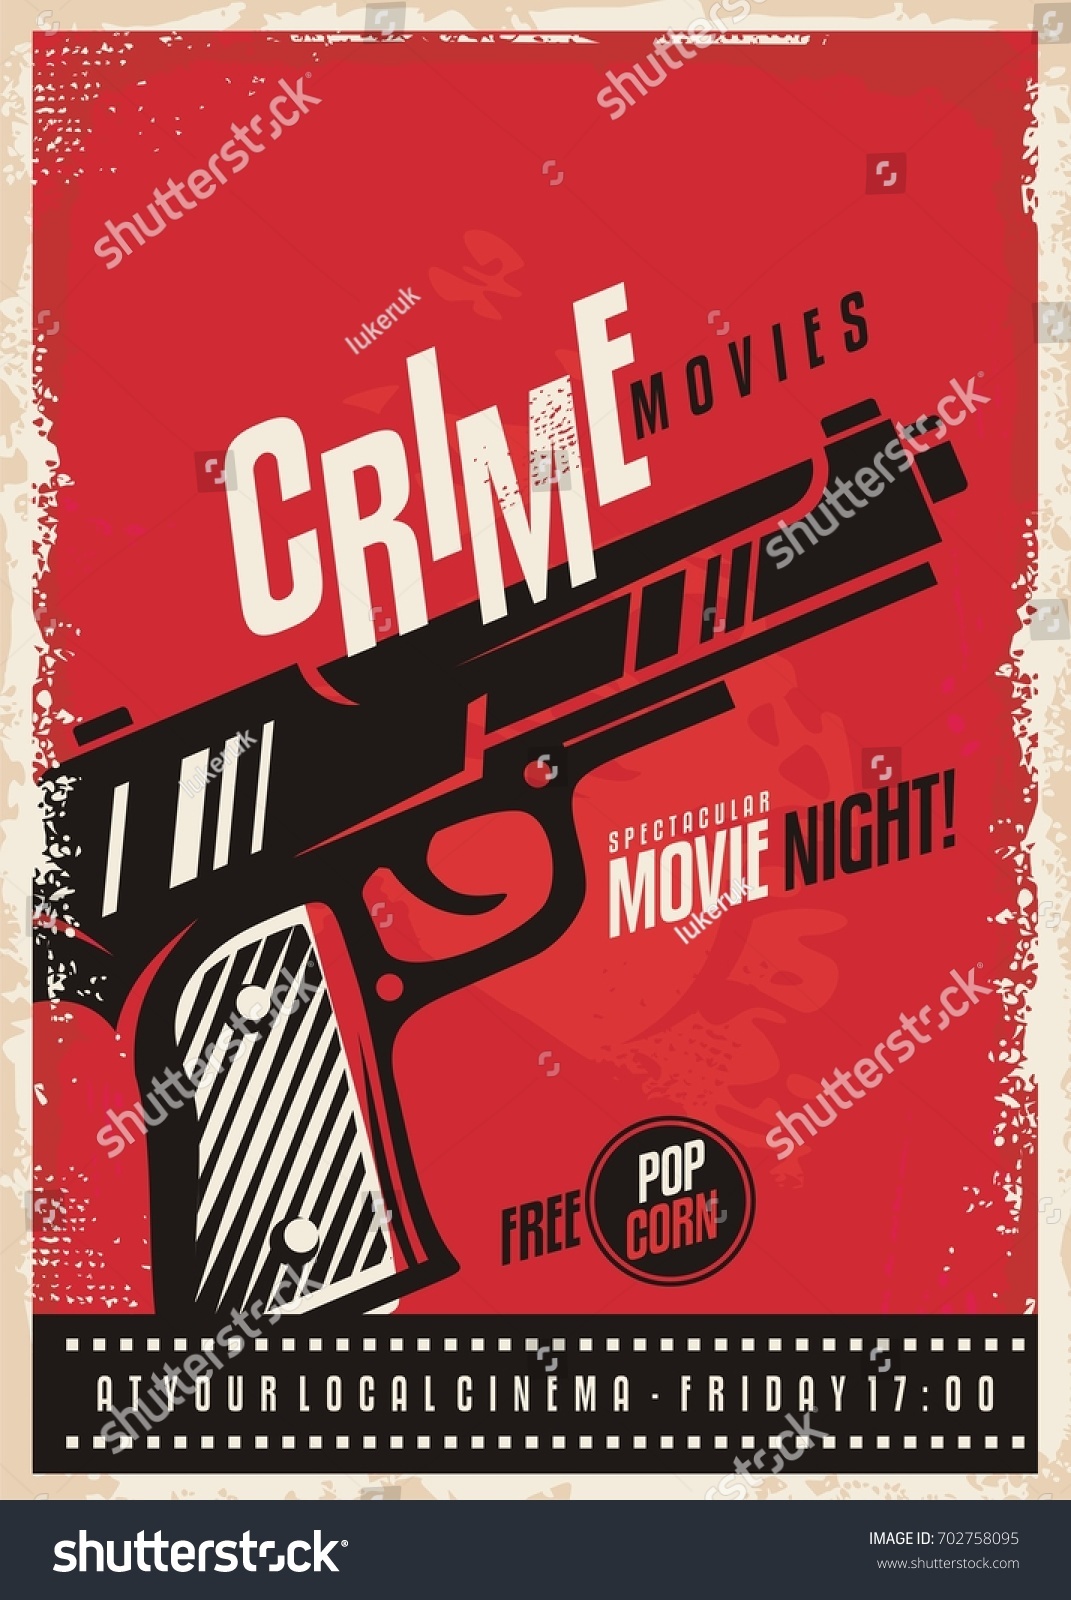 Movie Poster Design Template from image.shutterstock.com